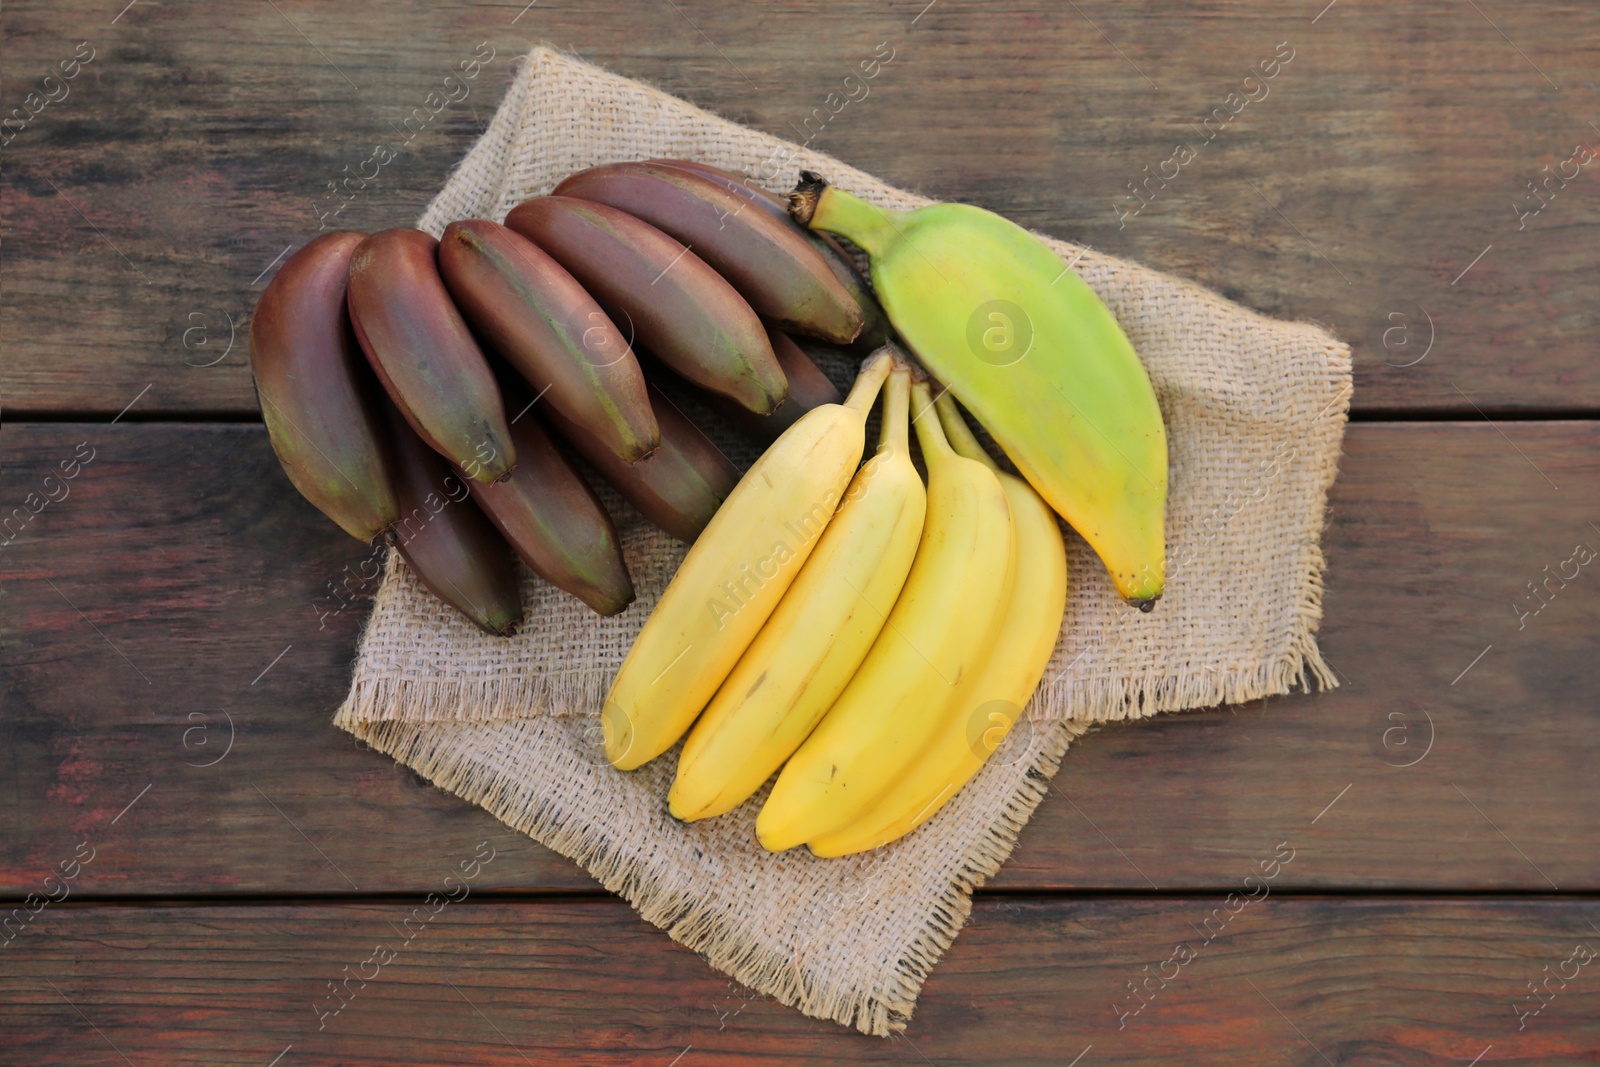 Photo of Different sorts of bananas on wooden table, top view